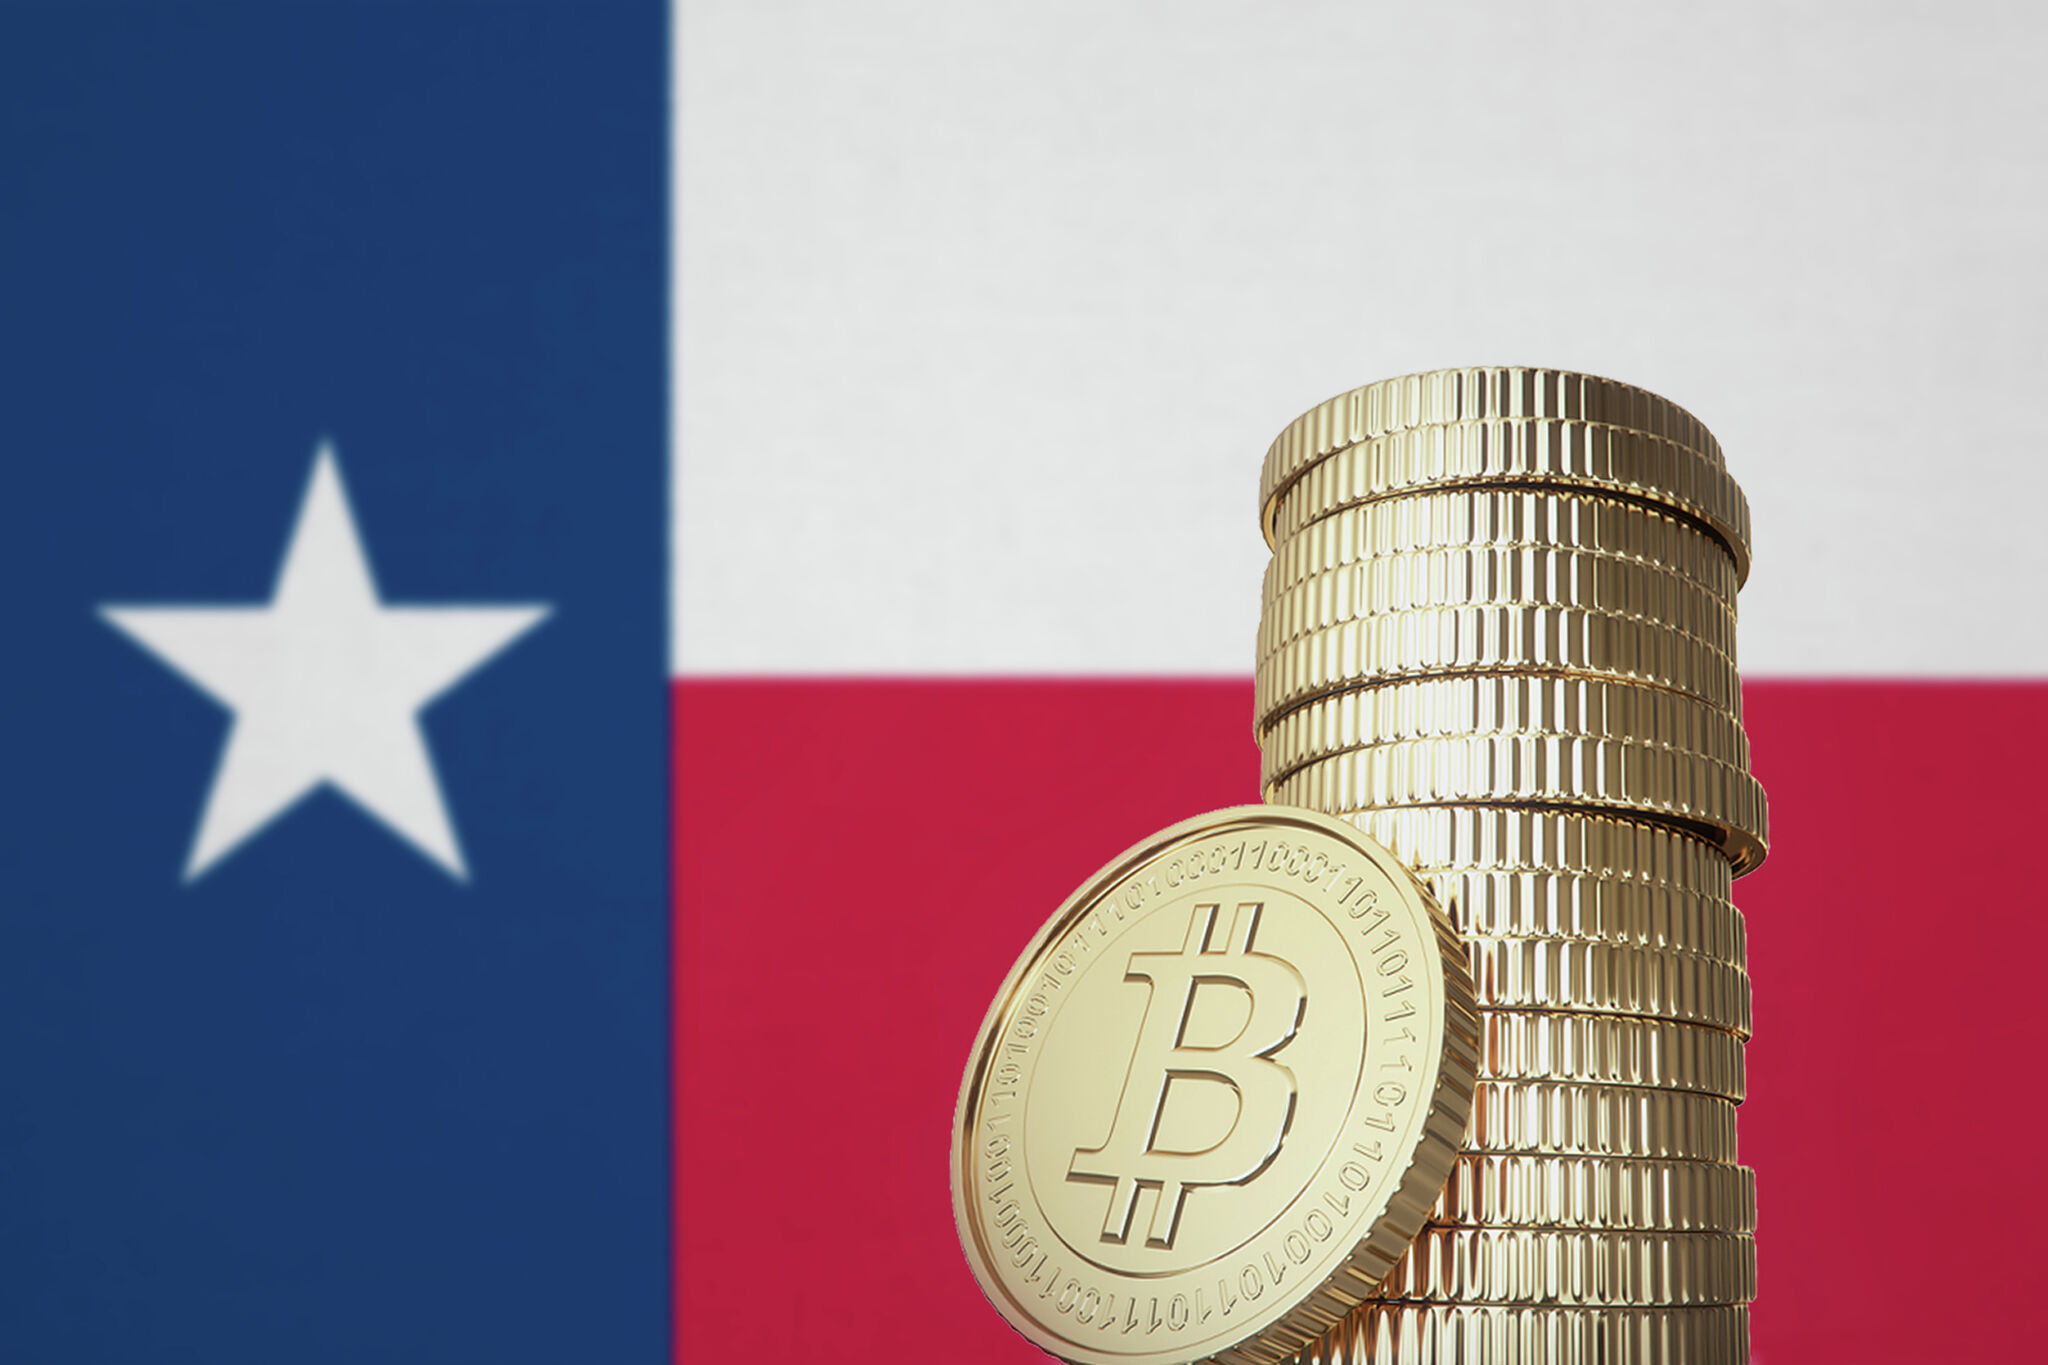 Texas bill to create digital crypto currency backed by gold